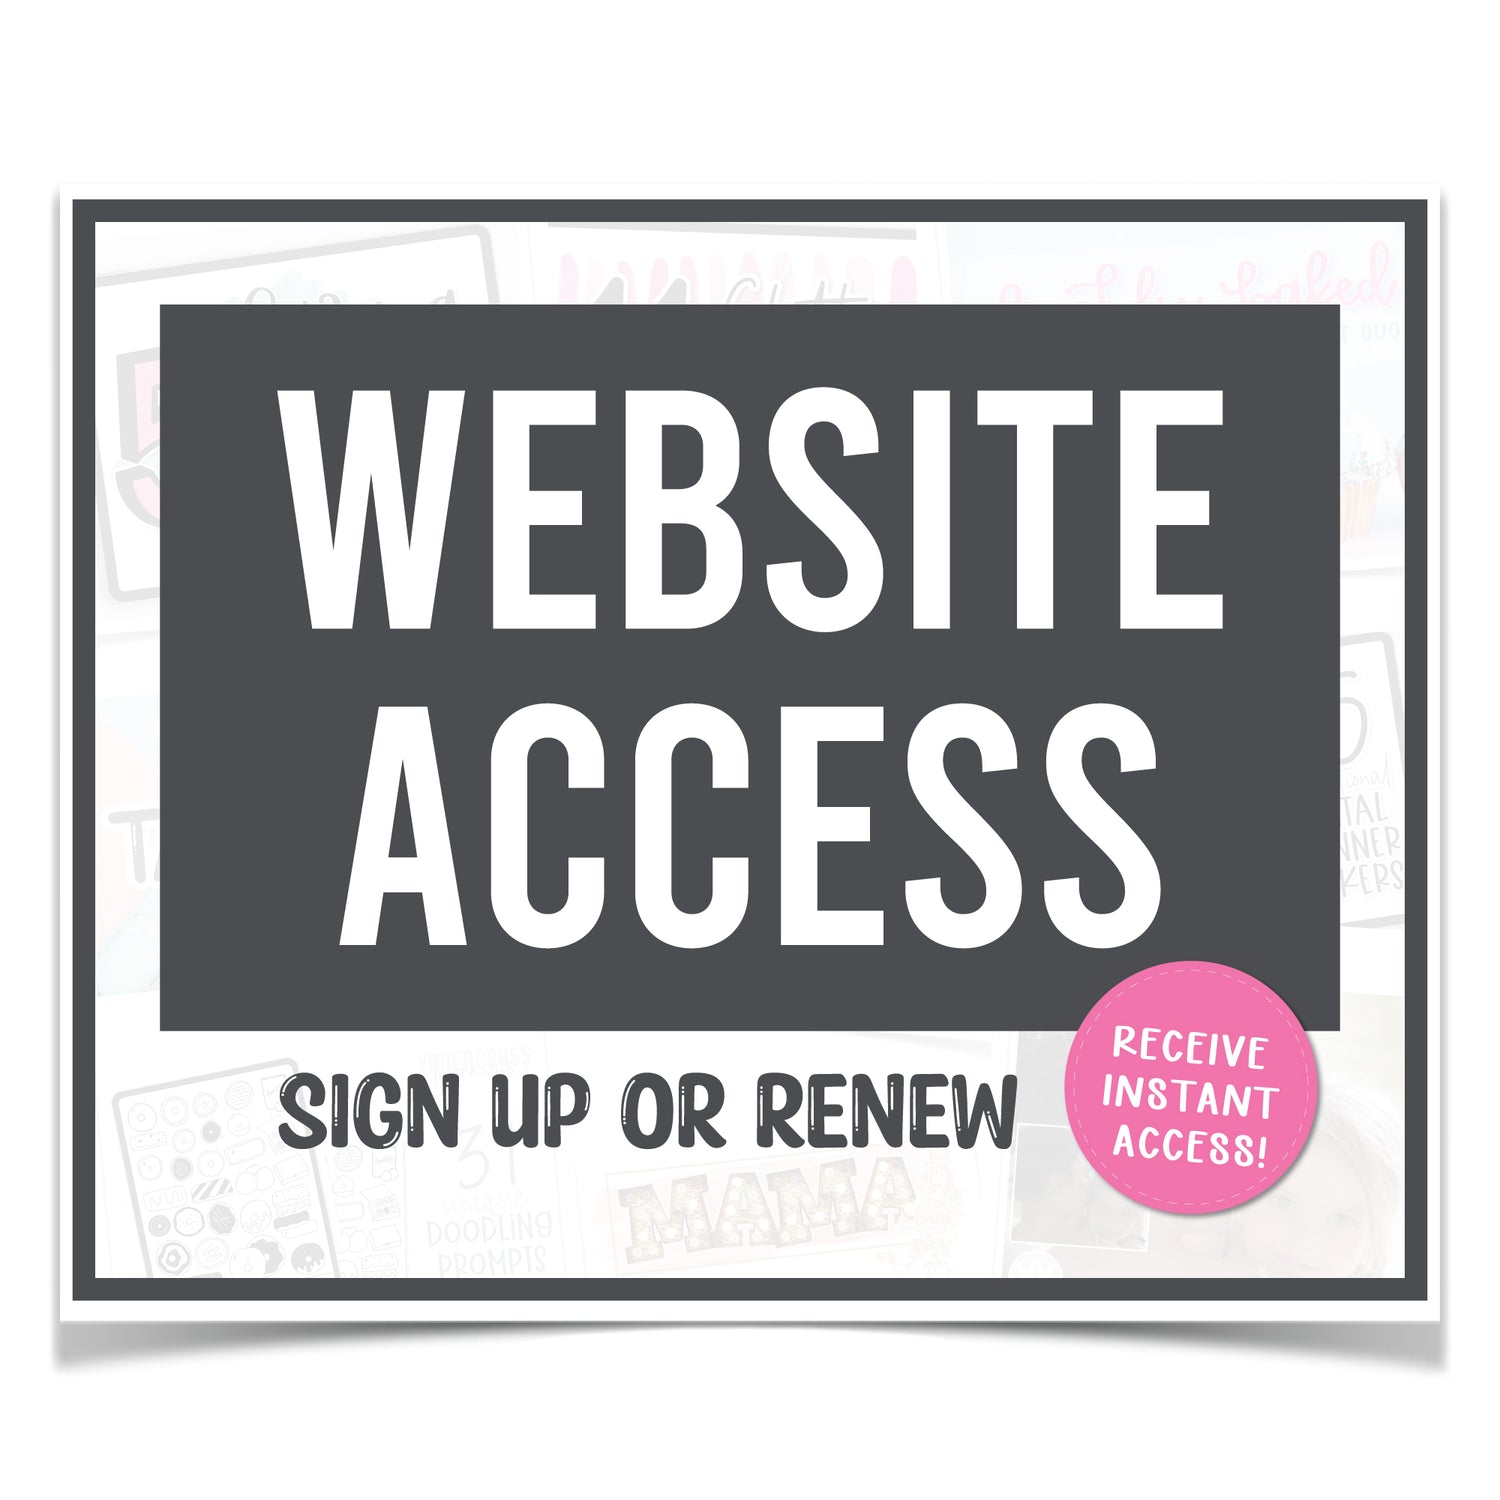 Sign Up or Renew